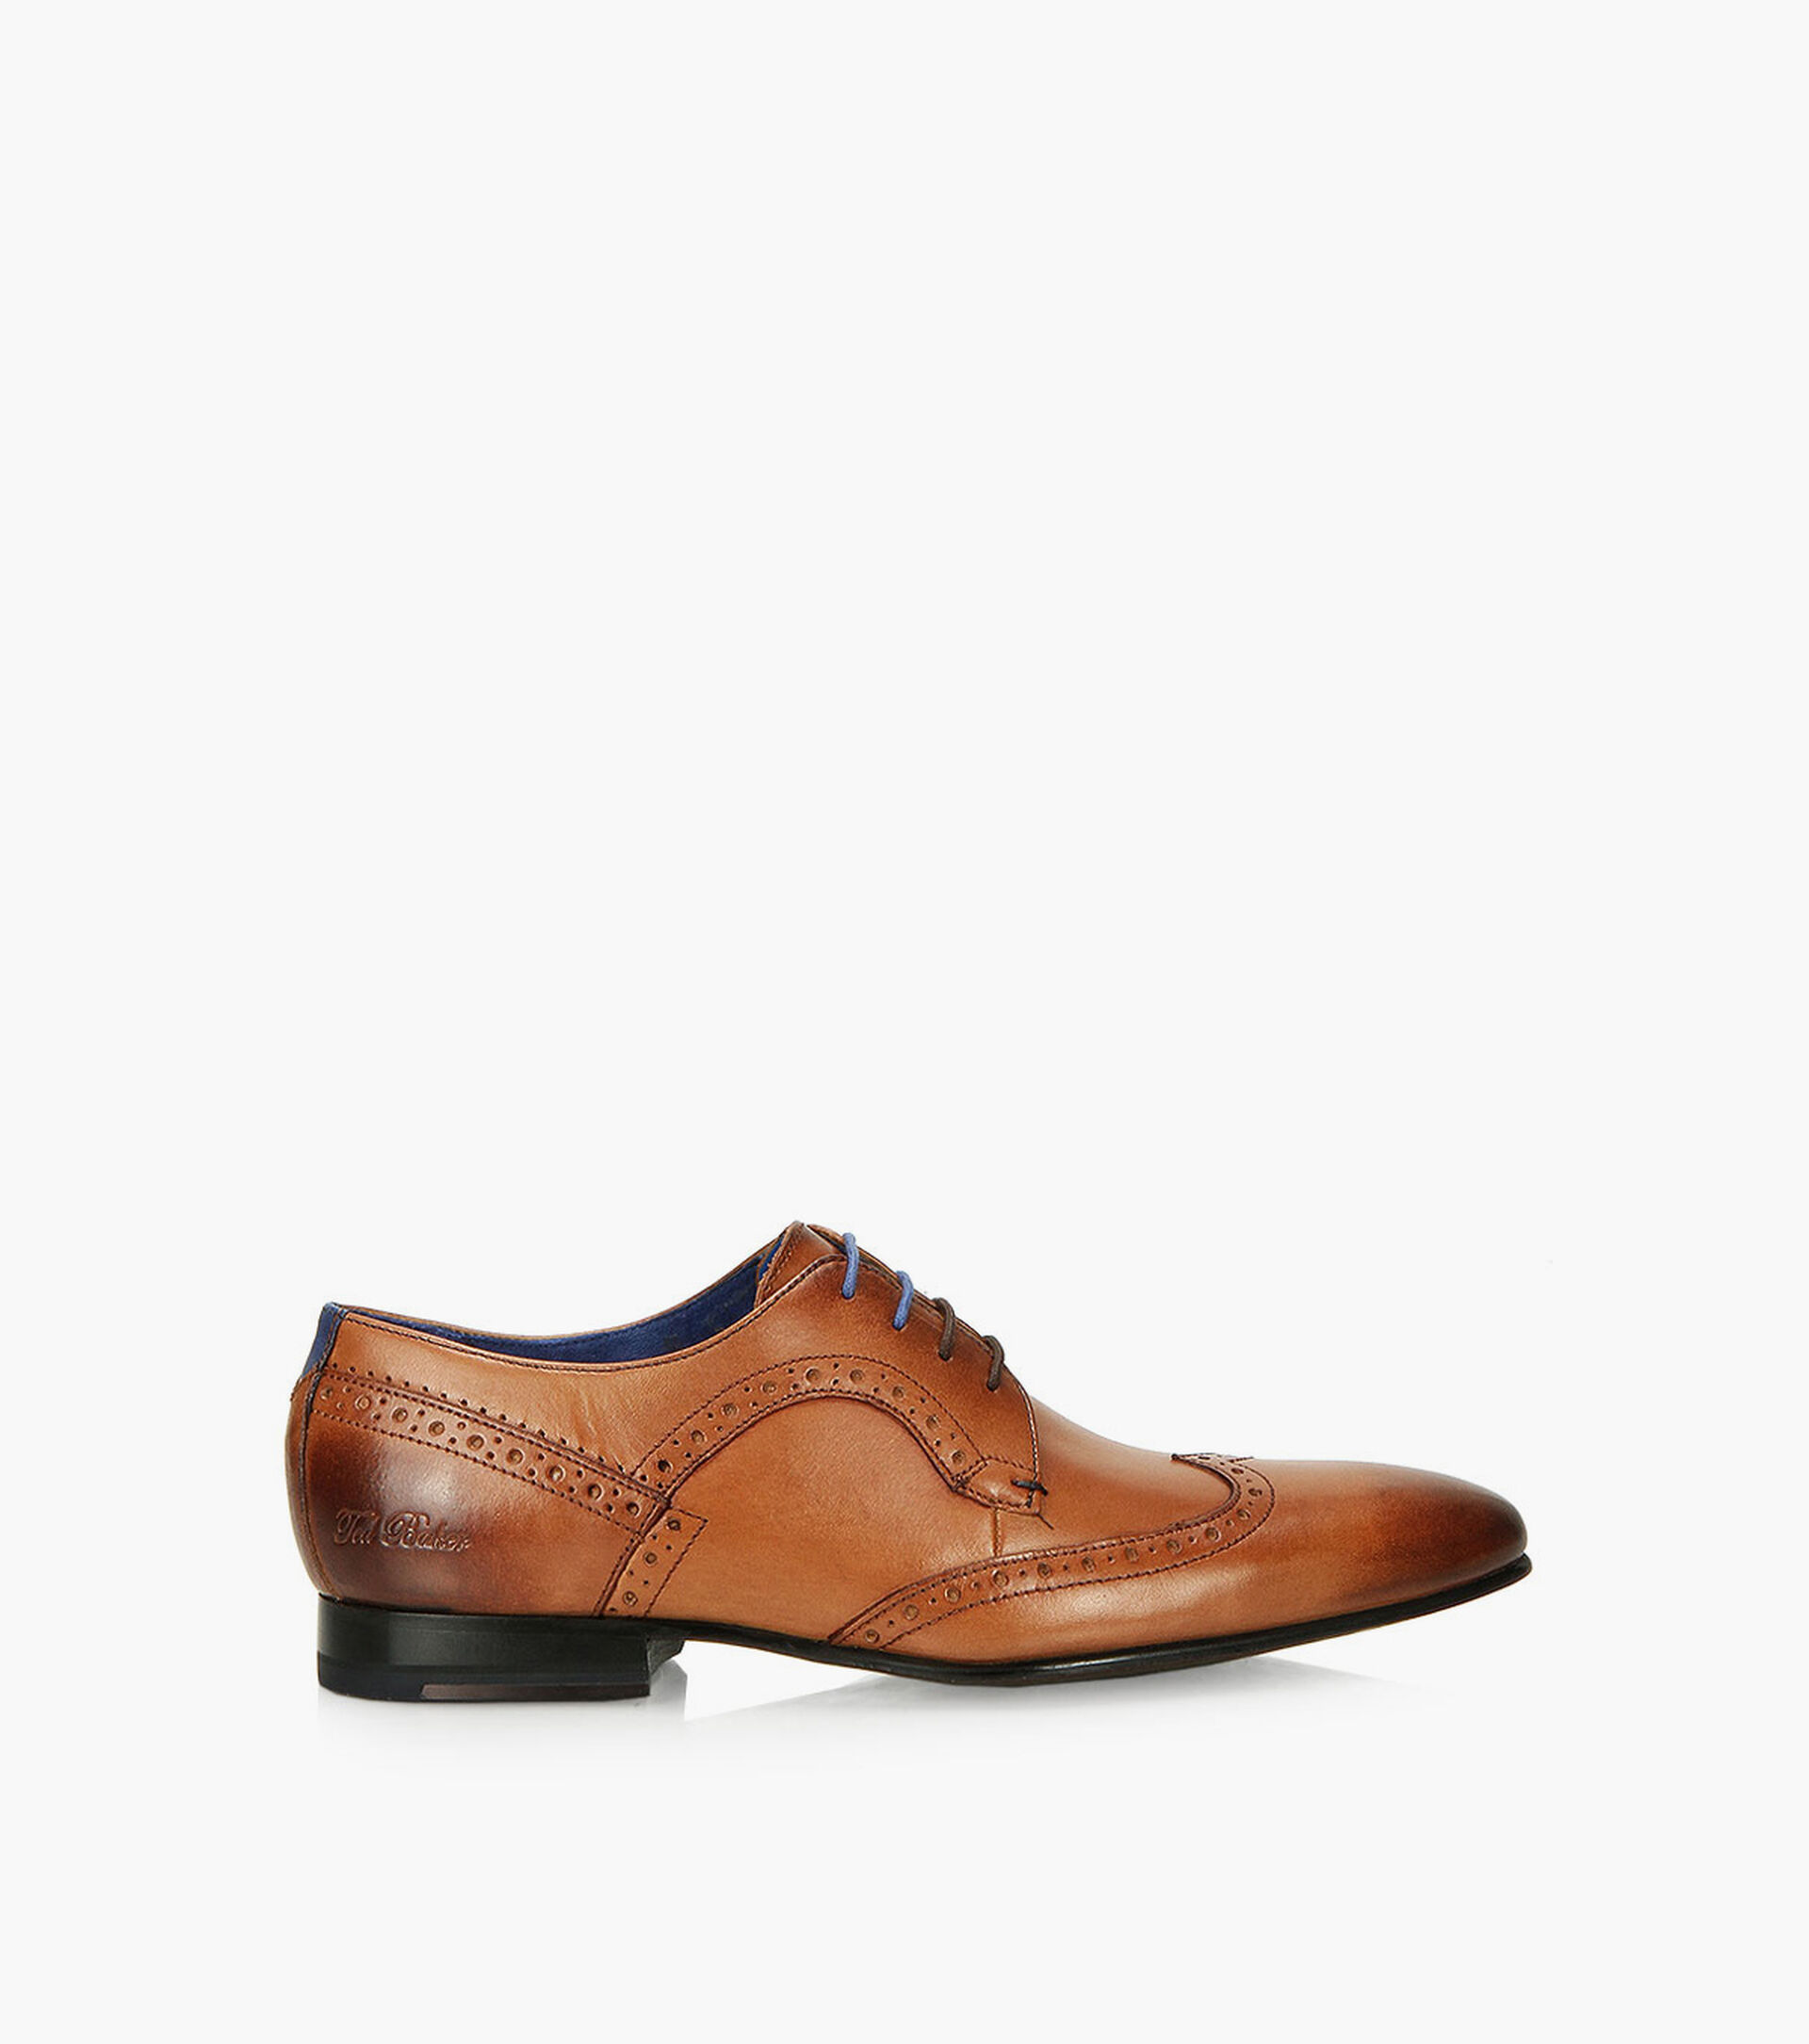 TED BAKER OLLIVUR - Leather | Browns Shoes